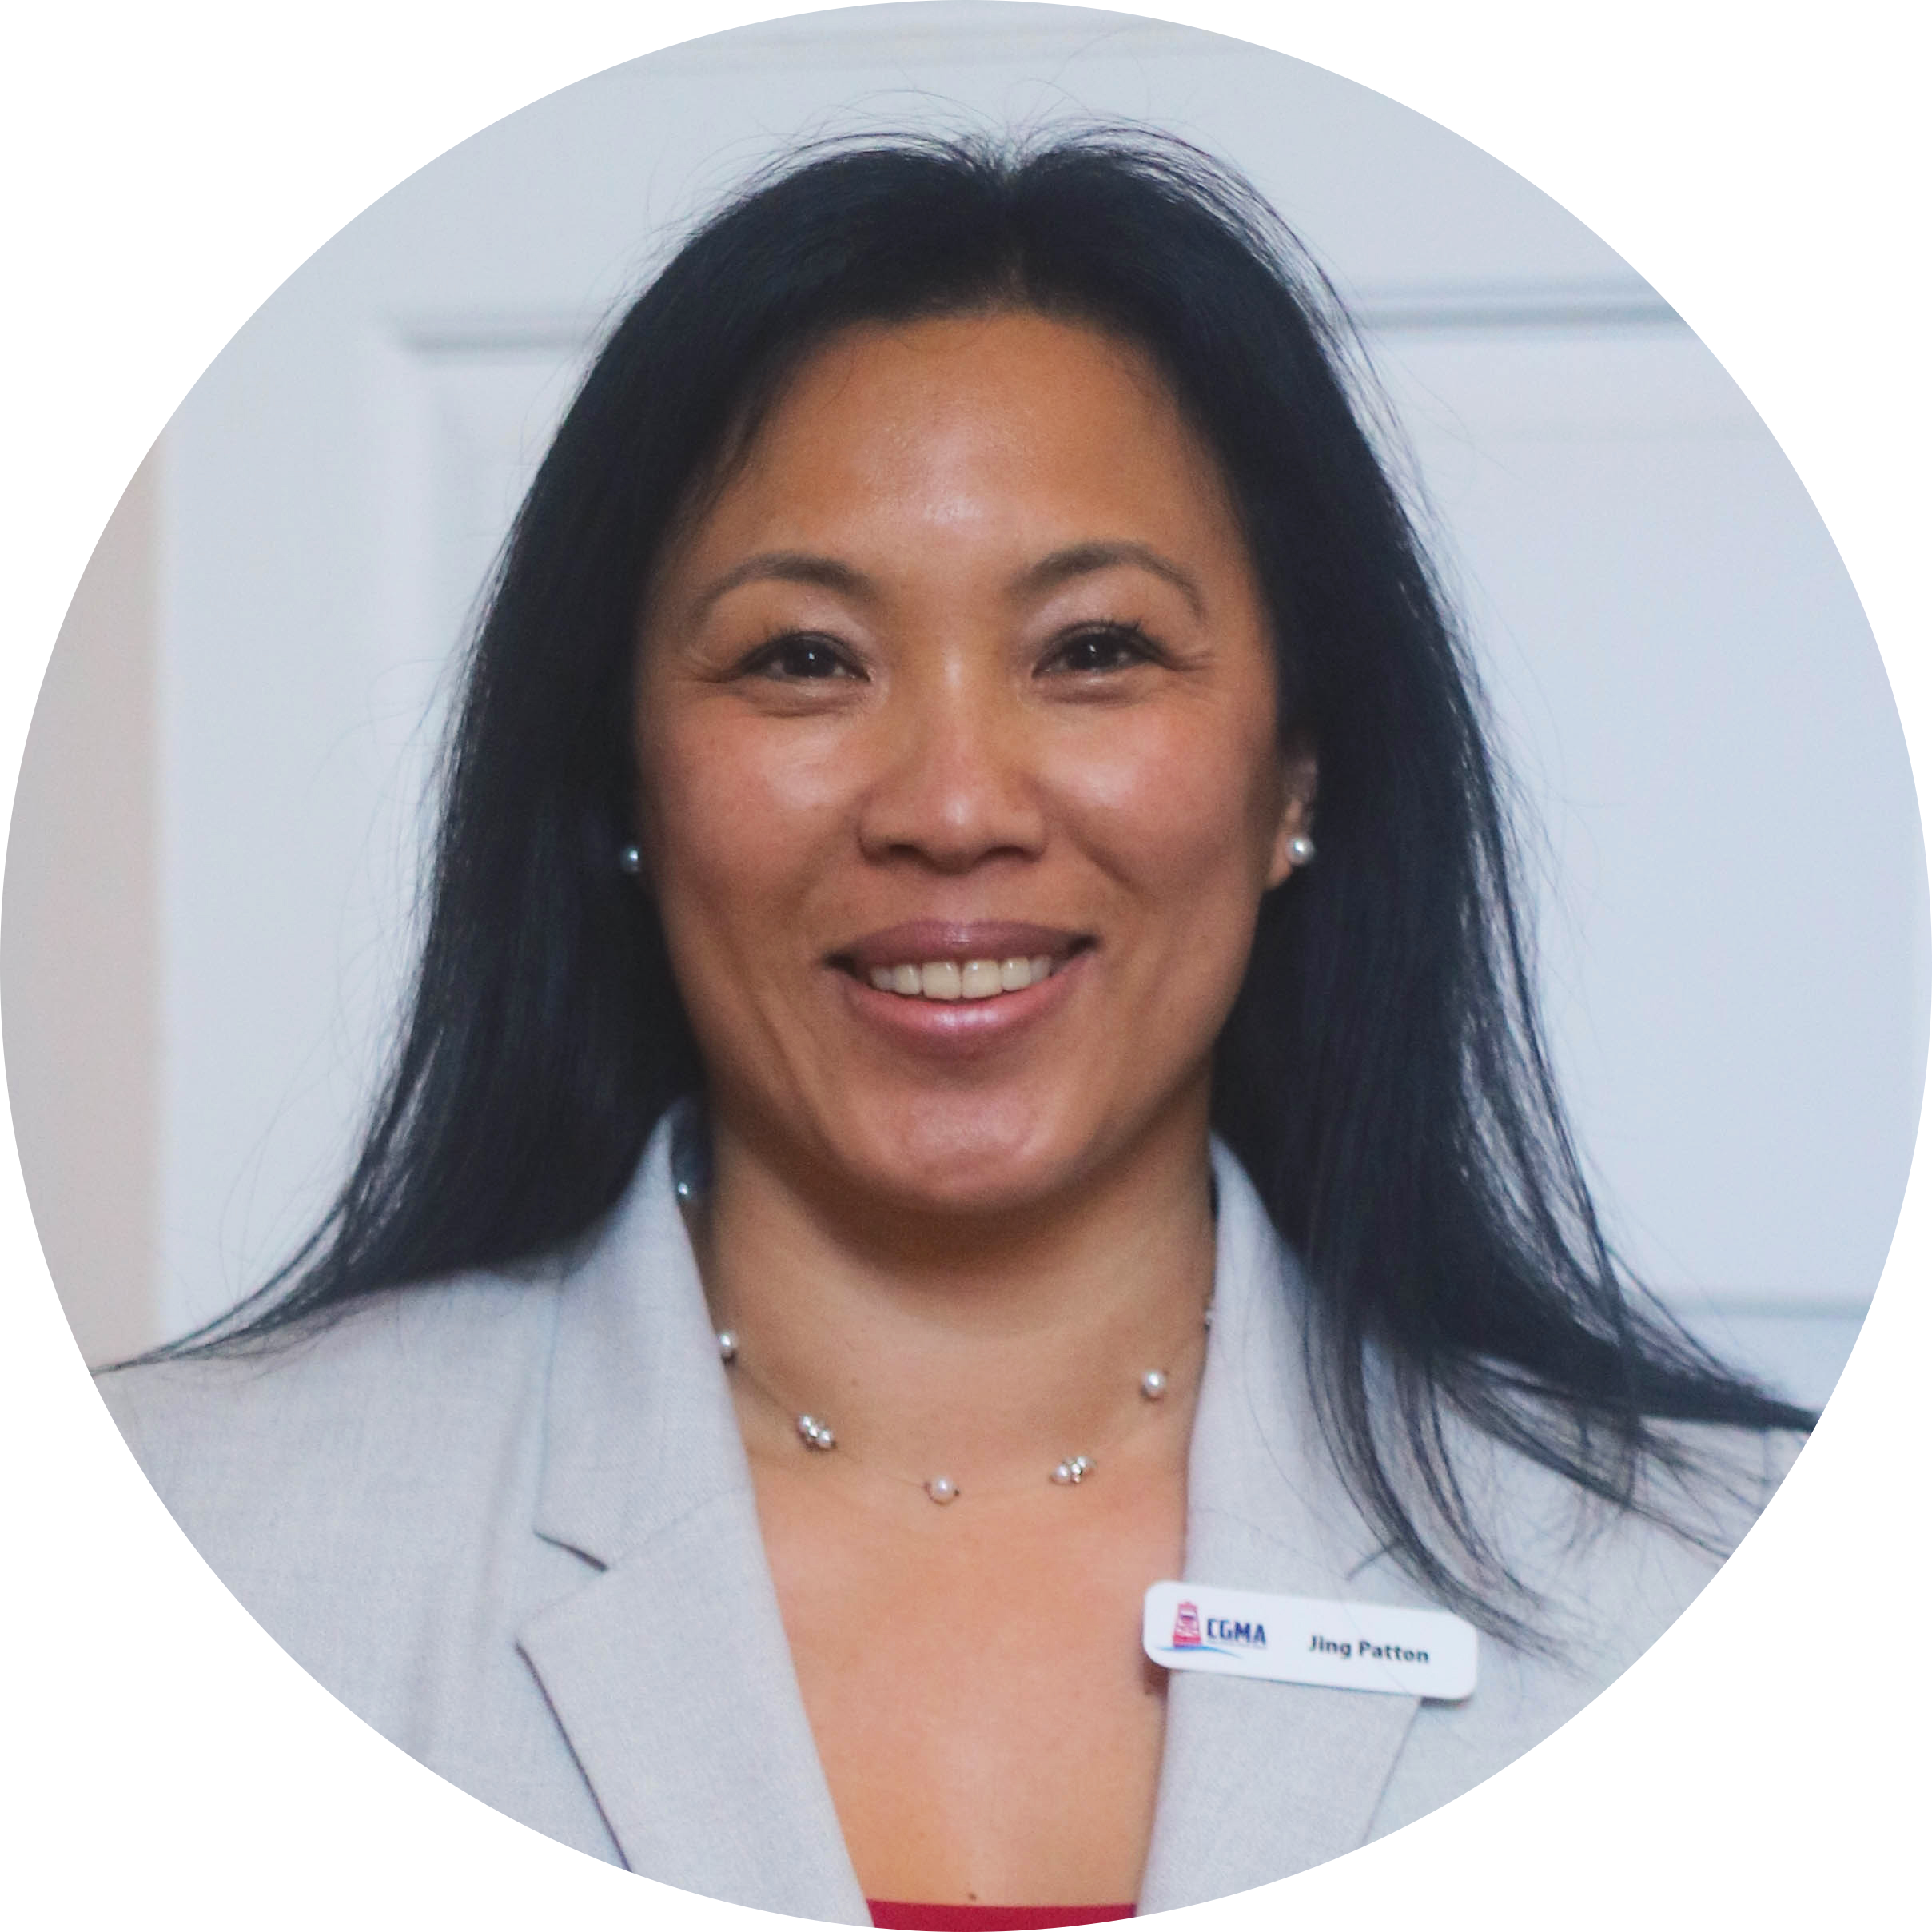 Jing Patton, Operations Support Manager